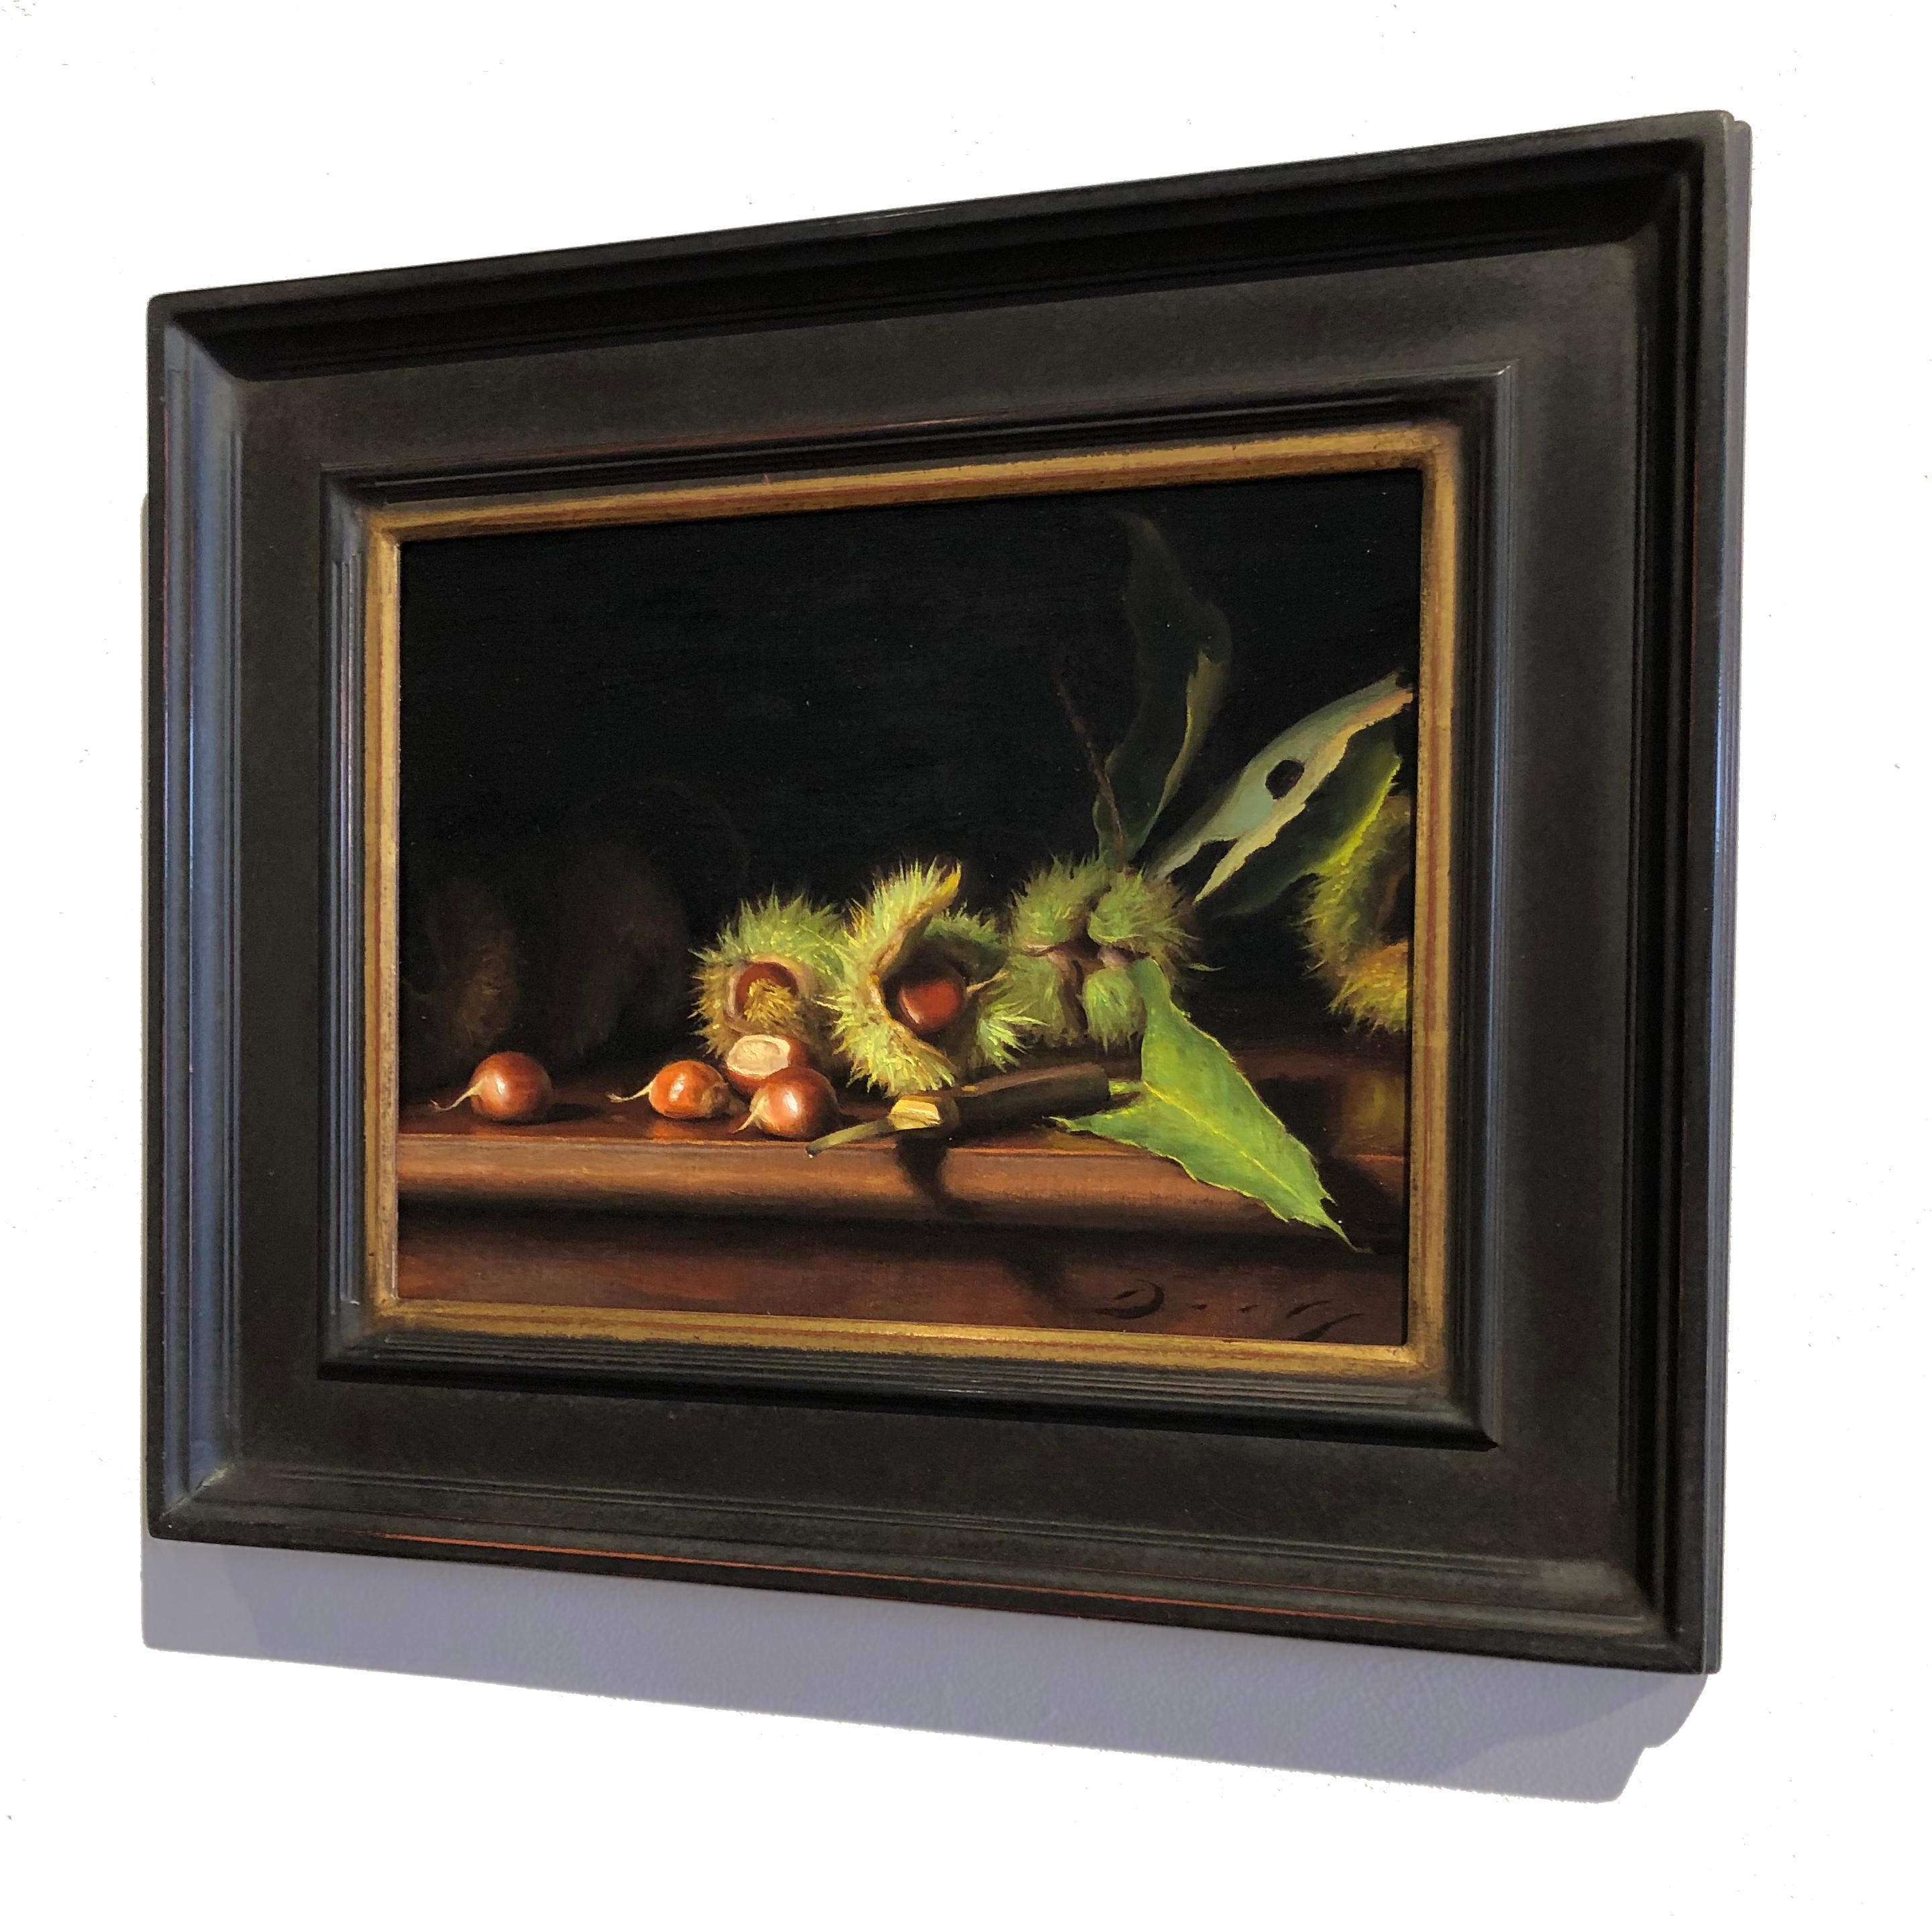 “Still Life with Freshly Fallen Chestnuts” is a realist oil on linen painting by Joseph Q. Daily. As the title suggests, the work depicts a still life scene with Chestnuts, some fallen and some still on the branch. Overall, the composition is dark